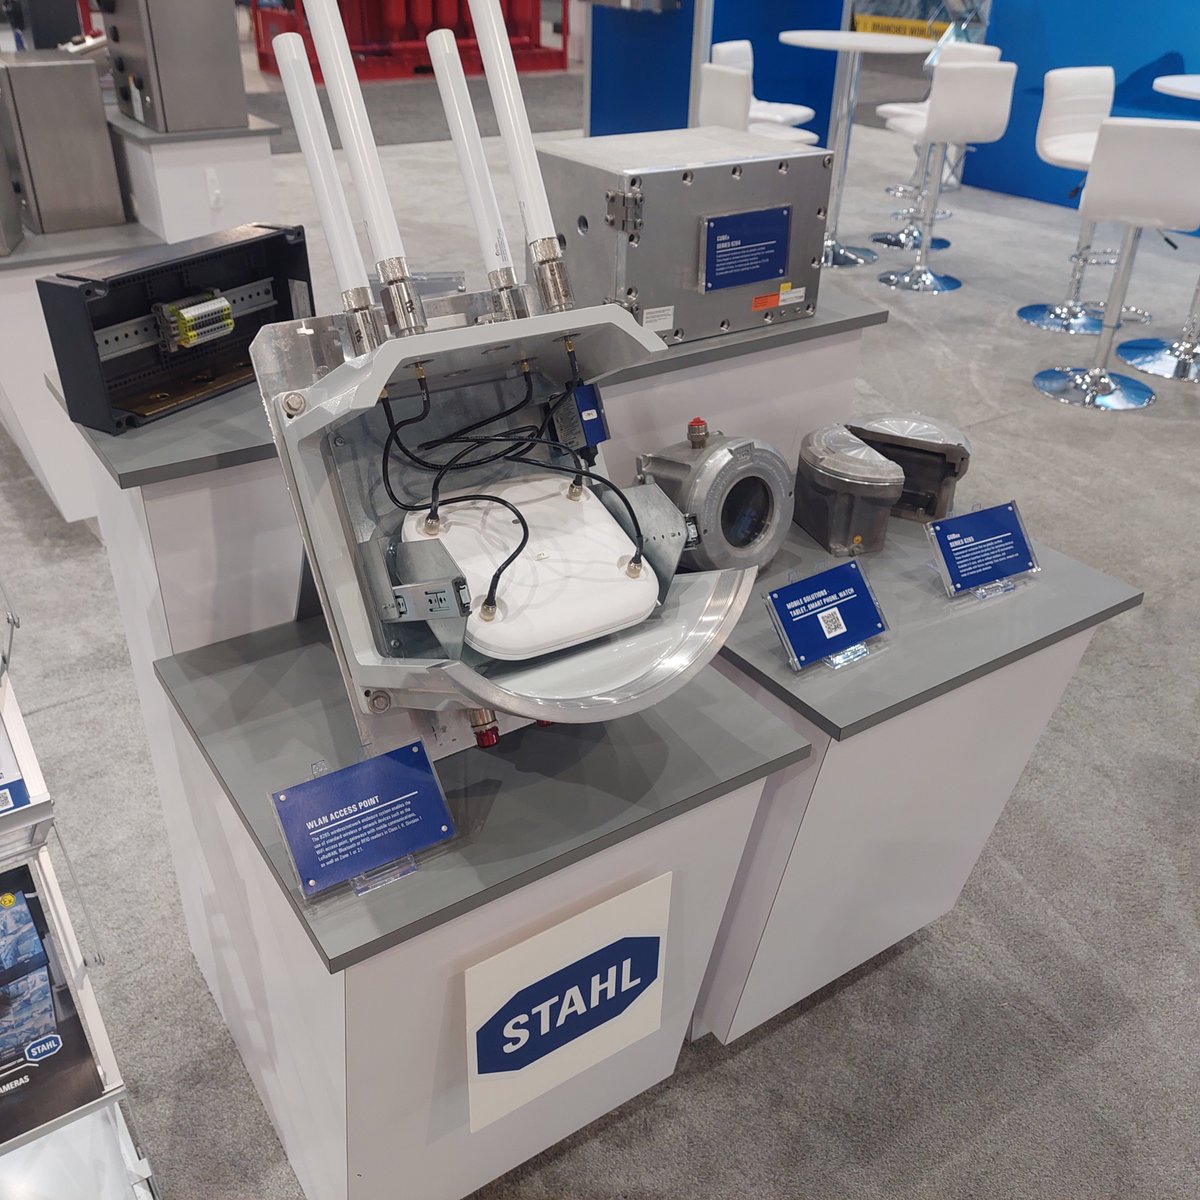 Excited for Day 2 at @OTCevents !🙌Swing by Booth #1115 to explore our Ex solutions. Demos are in full swing, showcasing #innovation in the #offshoreindustry. Don't miss out; come say hello and connect with us!🤝